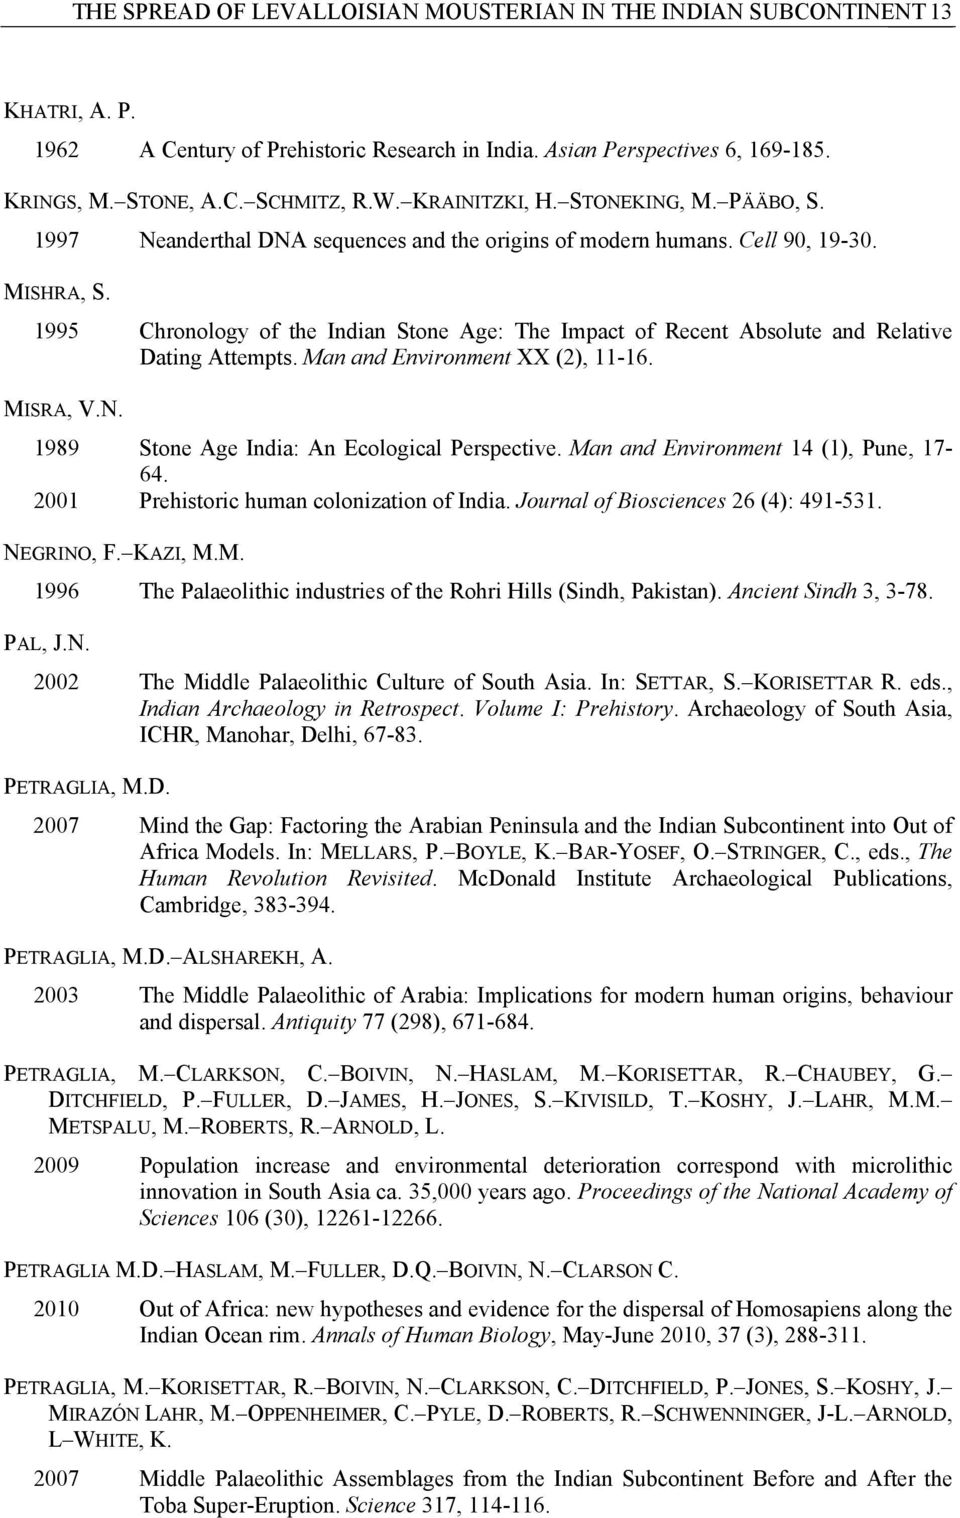 1995 Chronology of the Indian Stone Age: The Impact of Recent Absolute and Relative Dating Attempts. Man and Environment XX (2), 11-16. MISRA, V.N. 1989 Stone Age India: An Ecological Perspective.